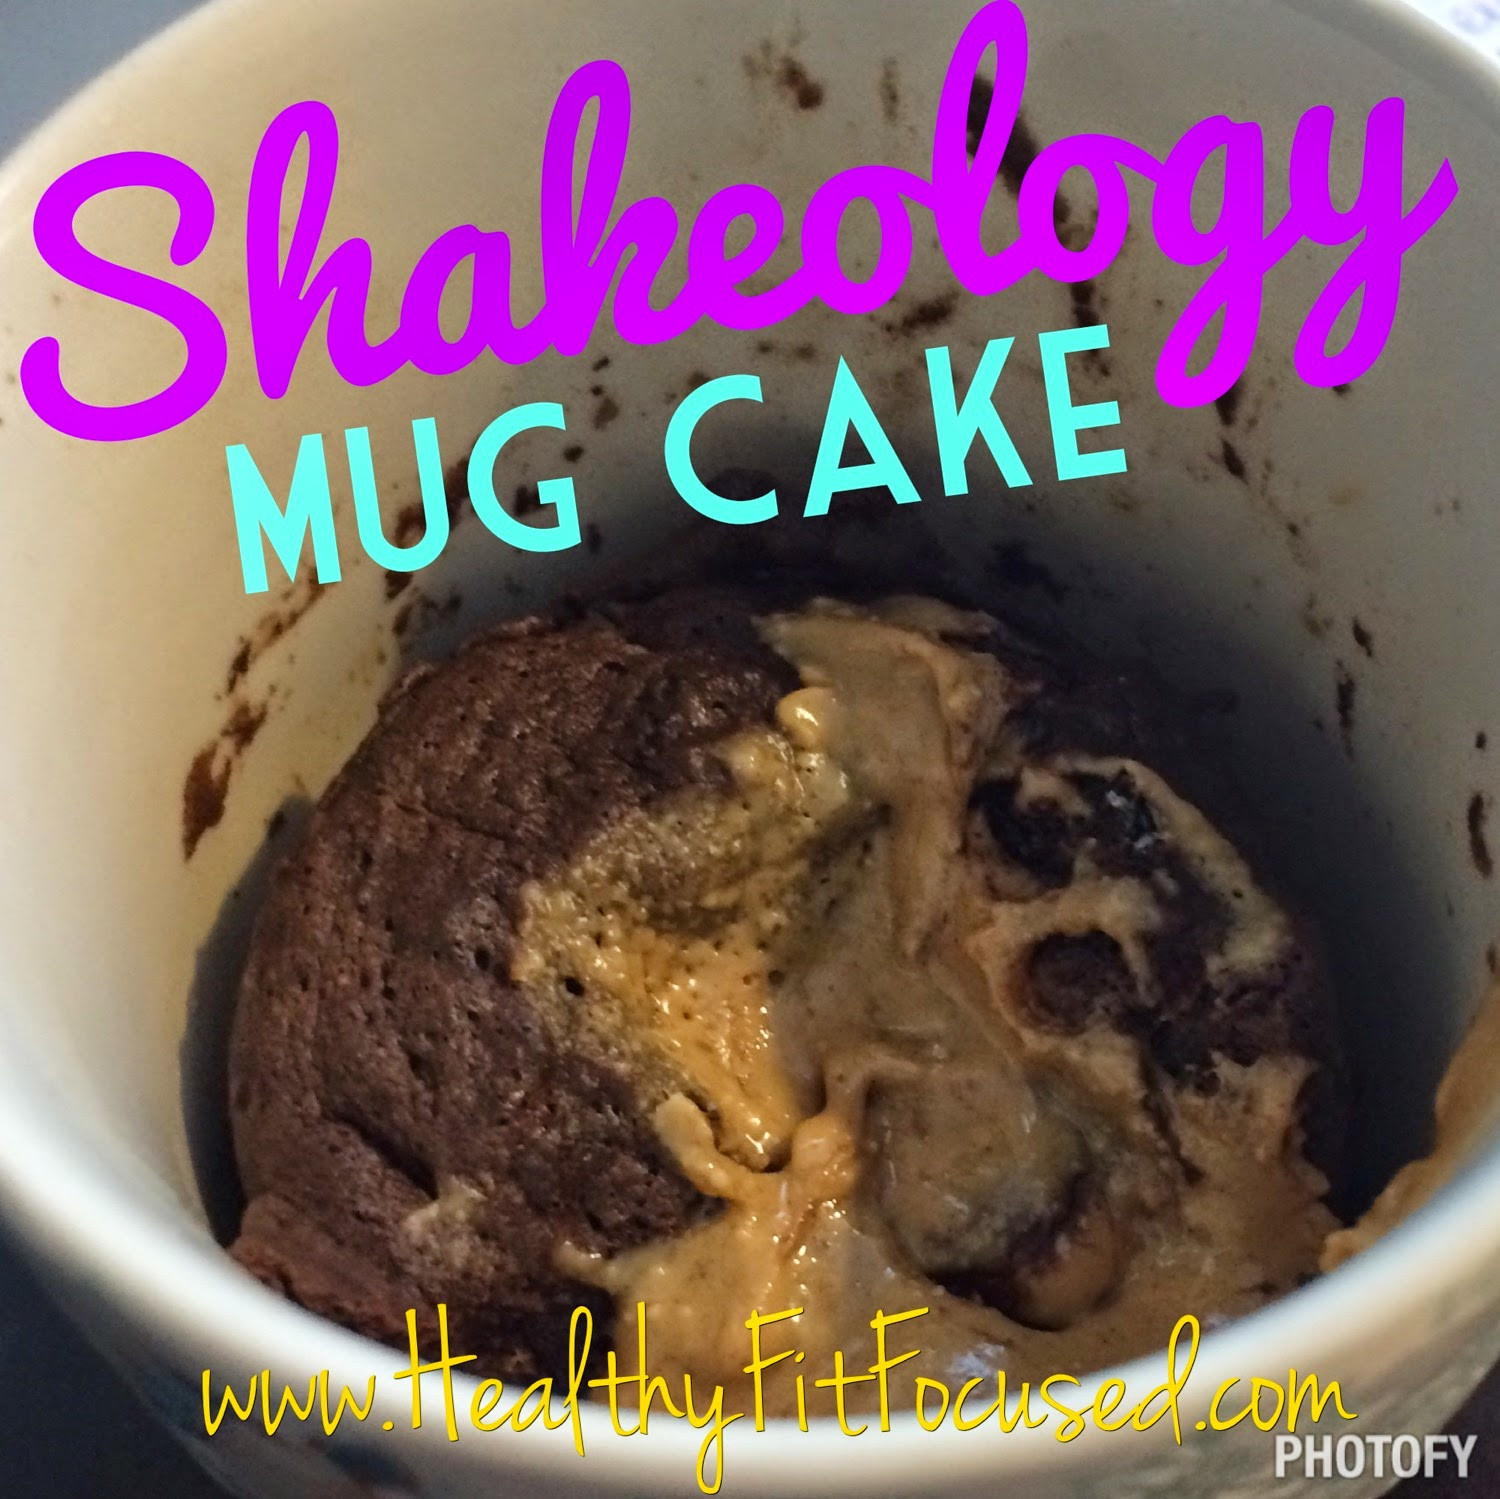 21 Day Fix Desserts
 Healthy Fit and Focused Shakeology Mug Cake a k a